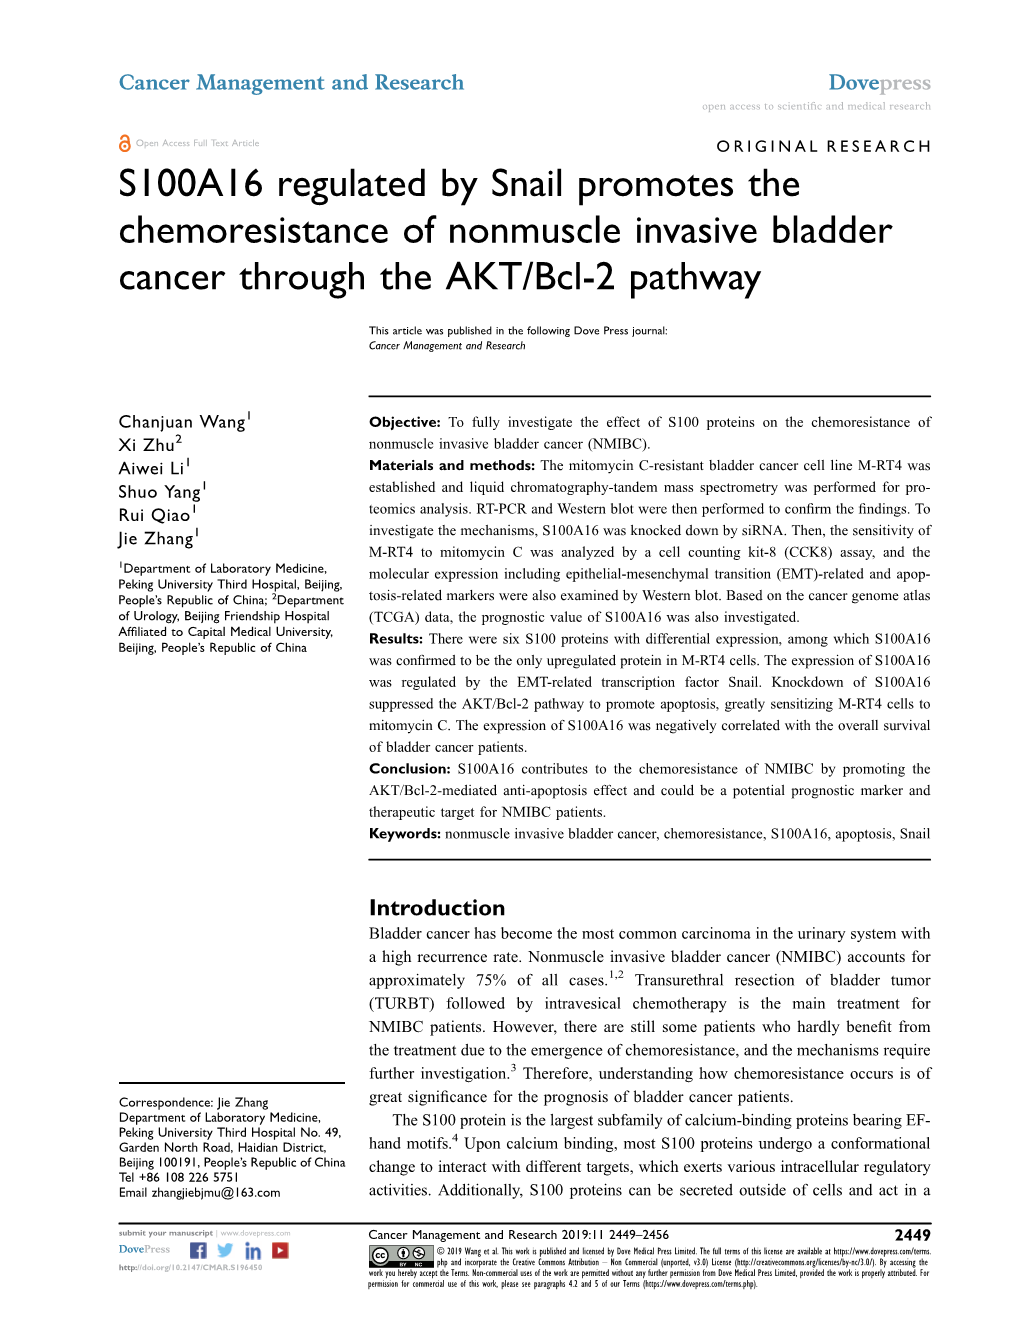 S100A16 Regulated by Snail Promotes the Chemoresistance of Nonmuscle Invasive Bladder Cancer Through the AKT/Bcl-2 Pathway